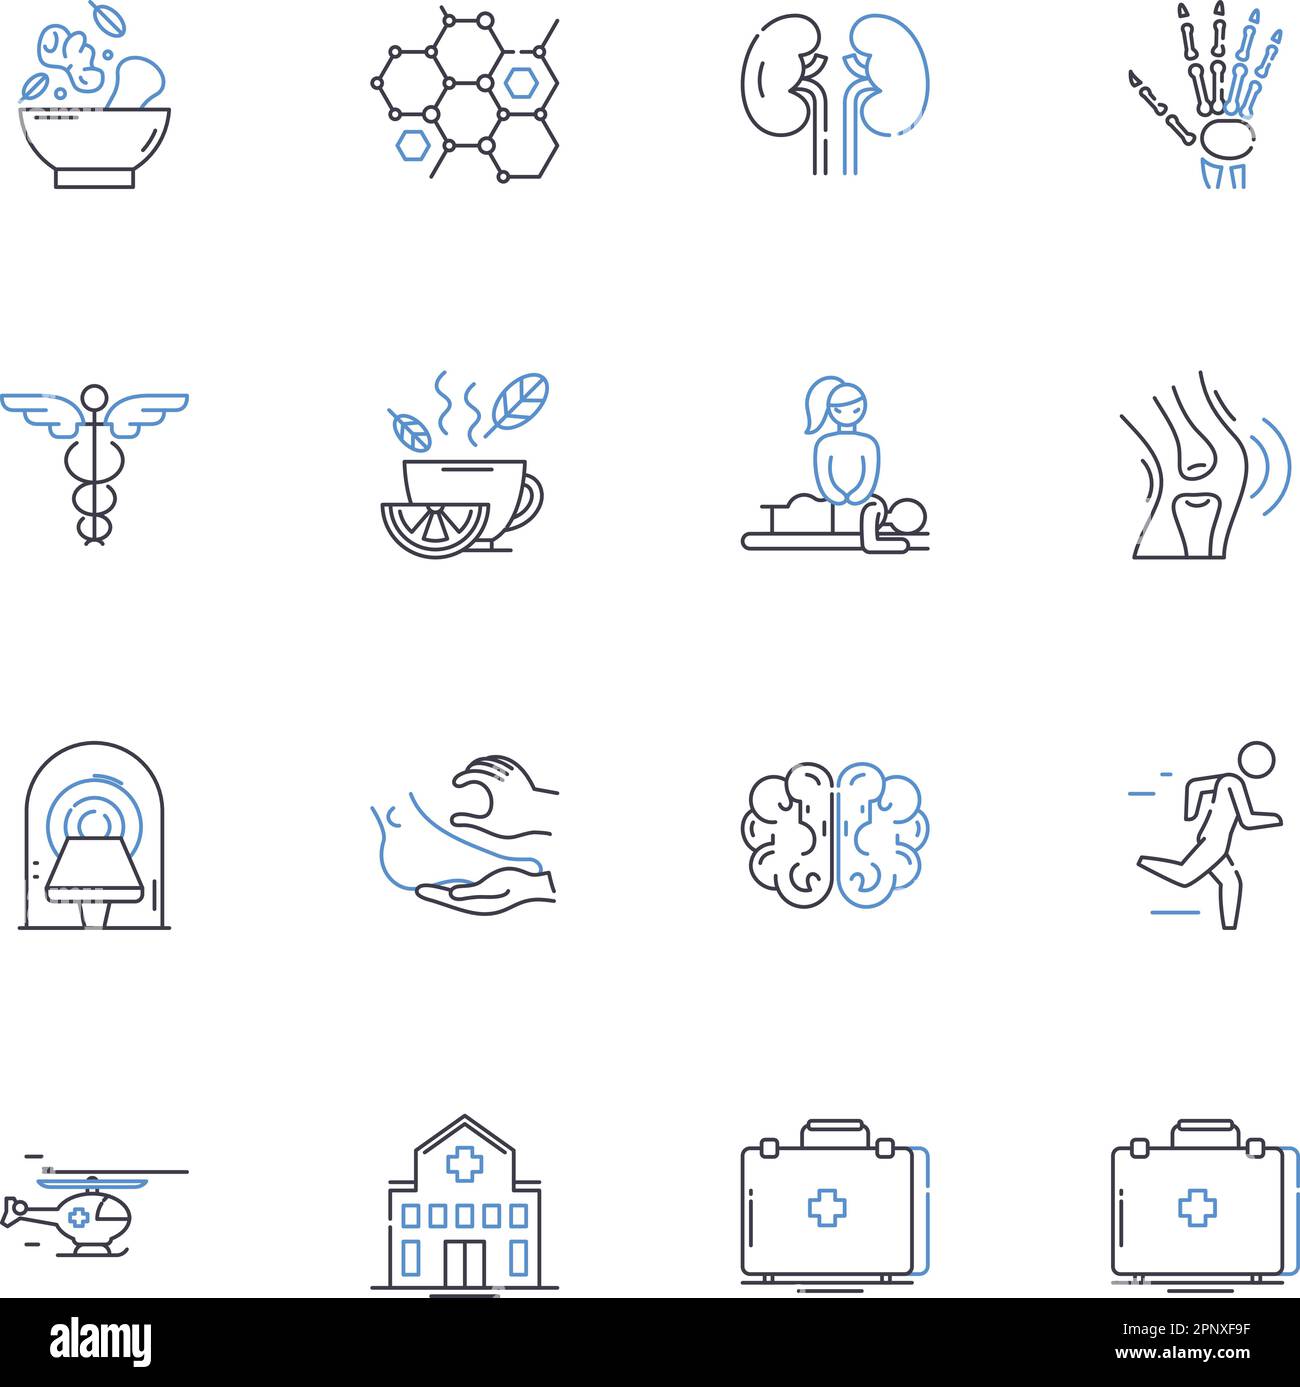 Politics and governance line icons collection. Democracy, Sovereignty, Power, Legitimacy, Authority, Accountability, Representation vector and linear Stock Vector